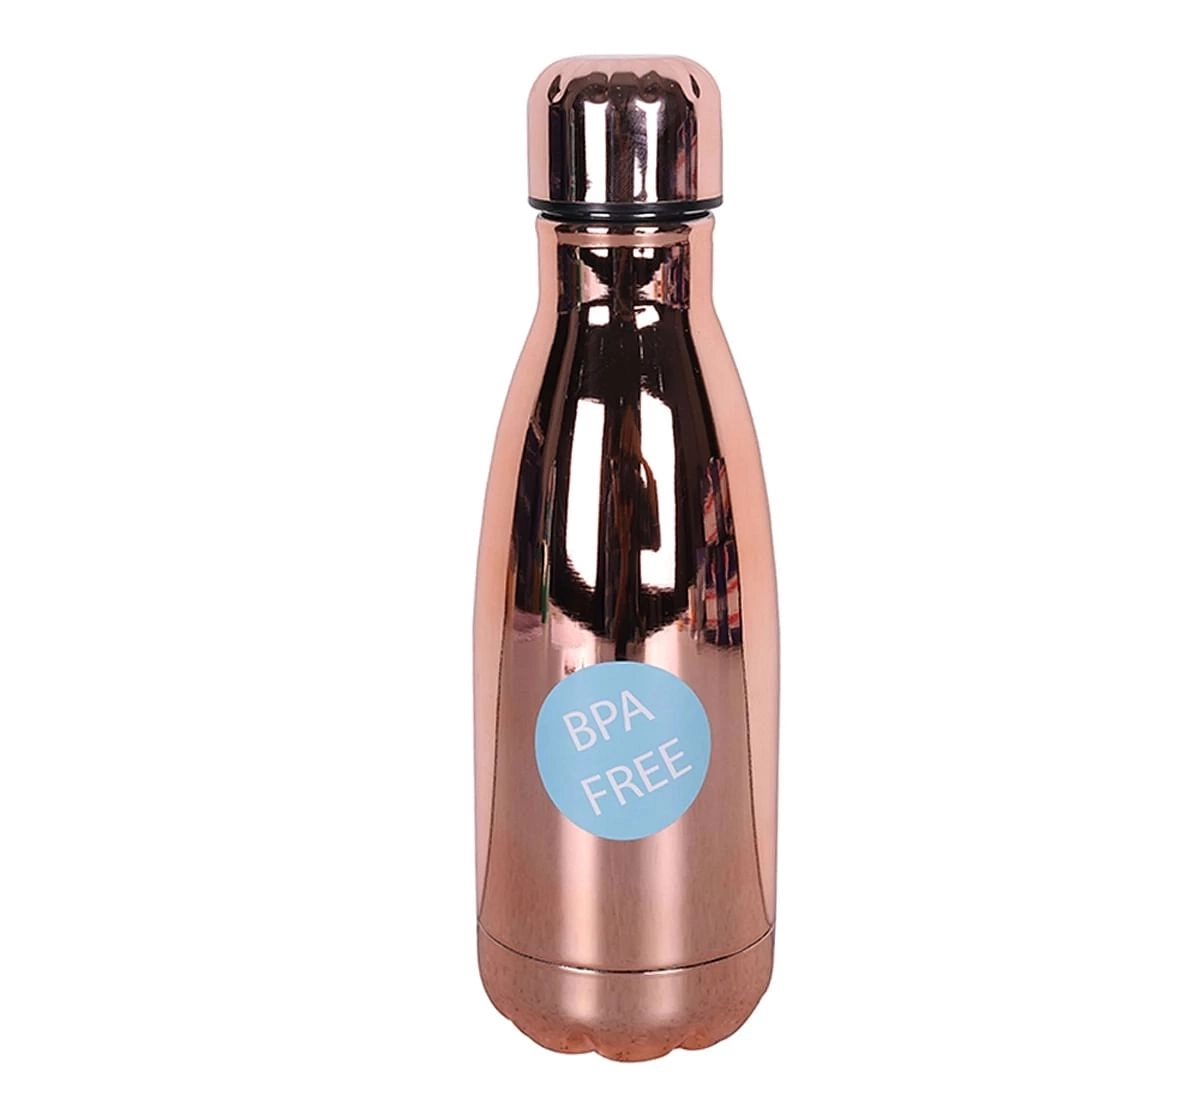 Stainless Steel Insulated Water Bottle by Hamster London for Kids, Rose Gold, Non-Toxic, BPA Free, 350ml, 5Y+